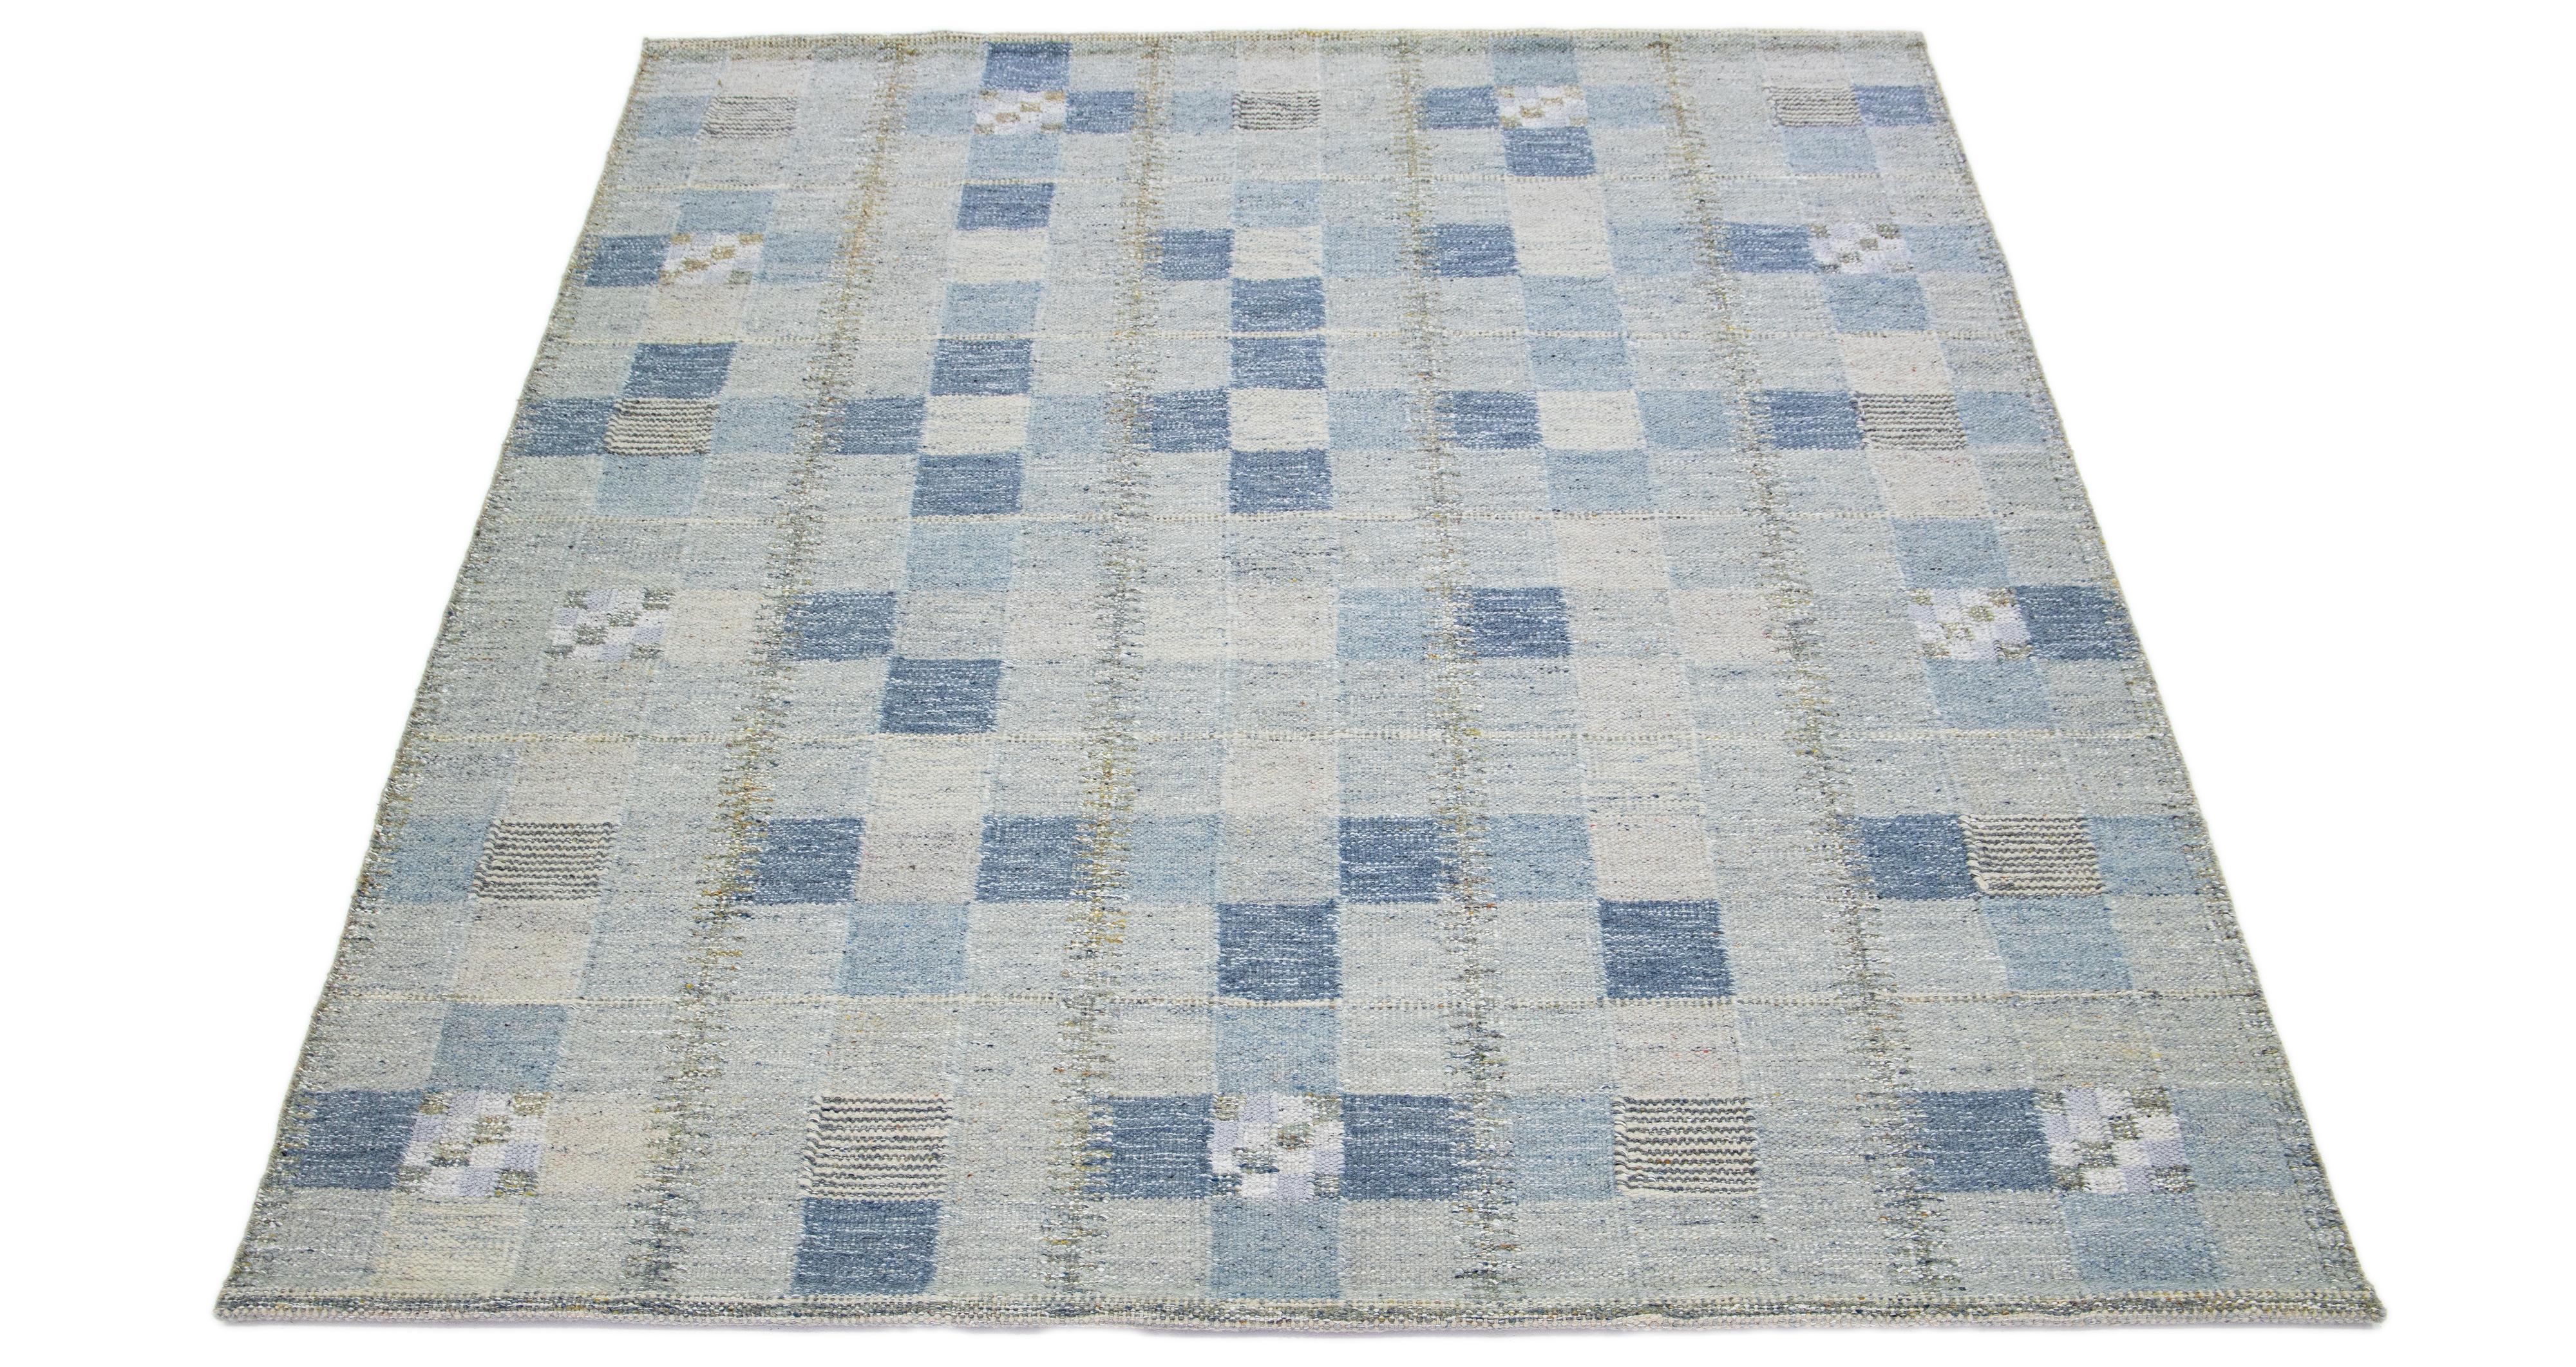 Geometric Modern Swedish Style Wool Rug In Gray And Blue  In New Condition For Sale In Norwalk, CT